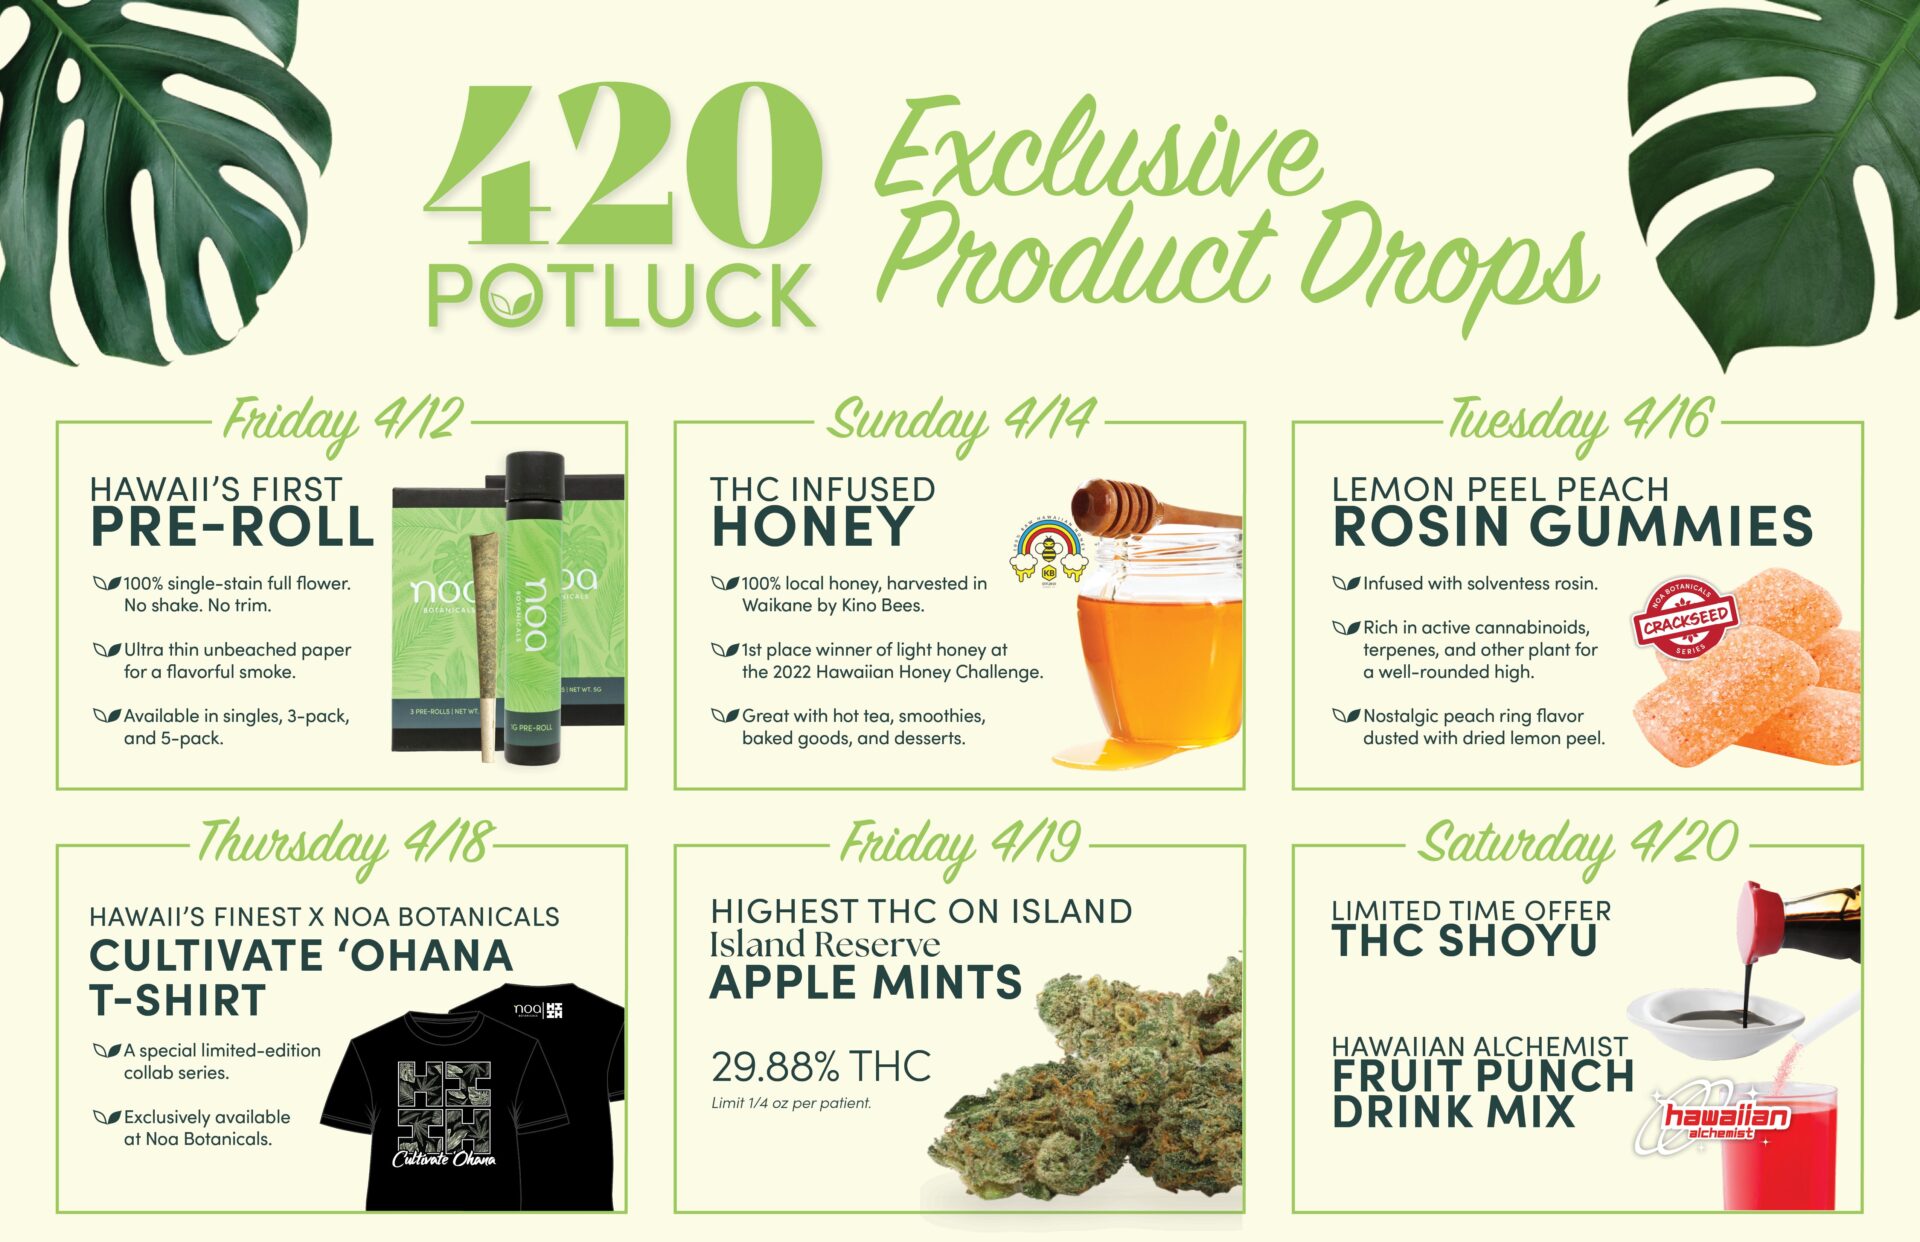 Advertisement for "420 exclusive product drops" featuring cannabis-related items including pre-rolls, thc infused honey, rosin gummies, and thc mints, with dates and descriptions for each product.